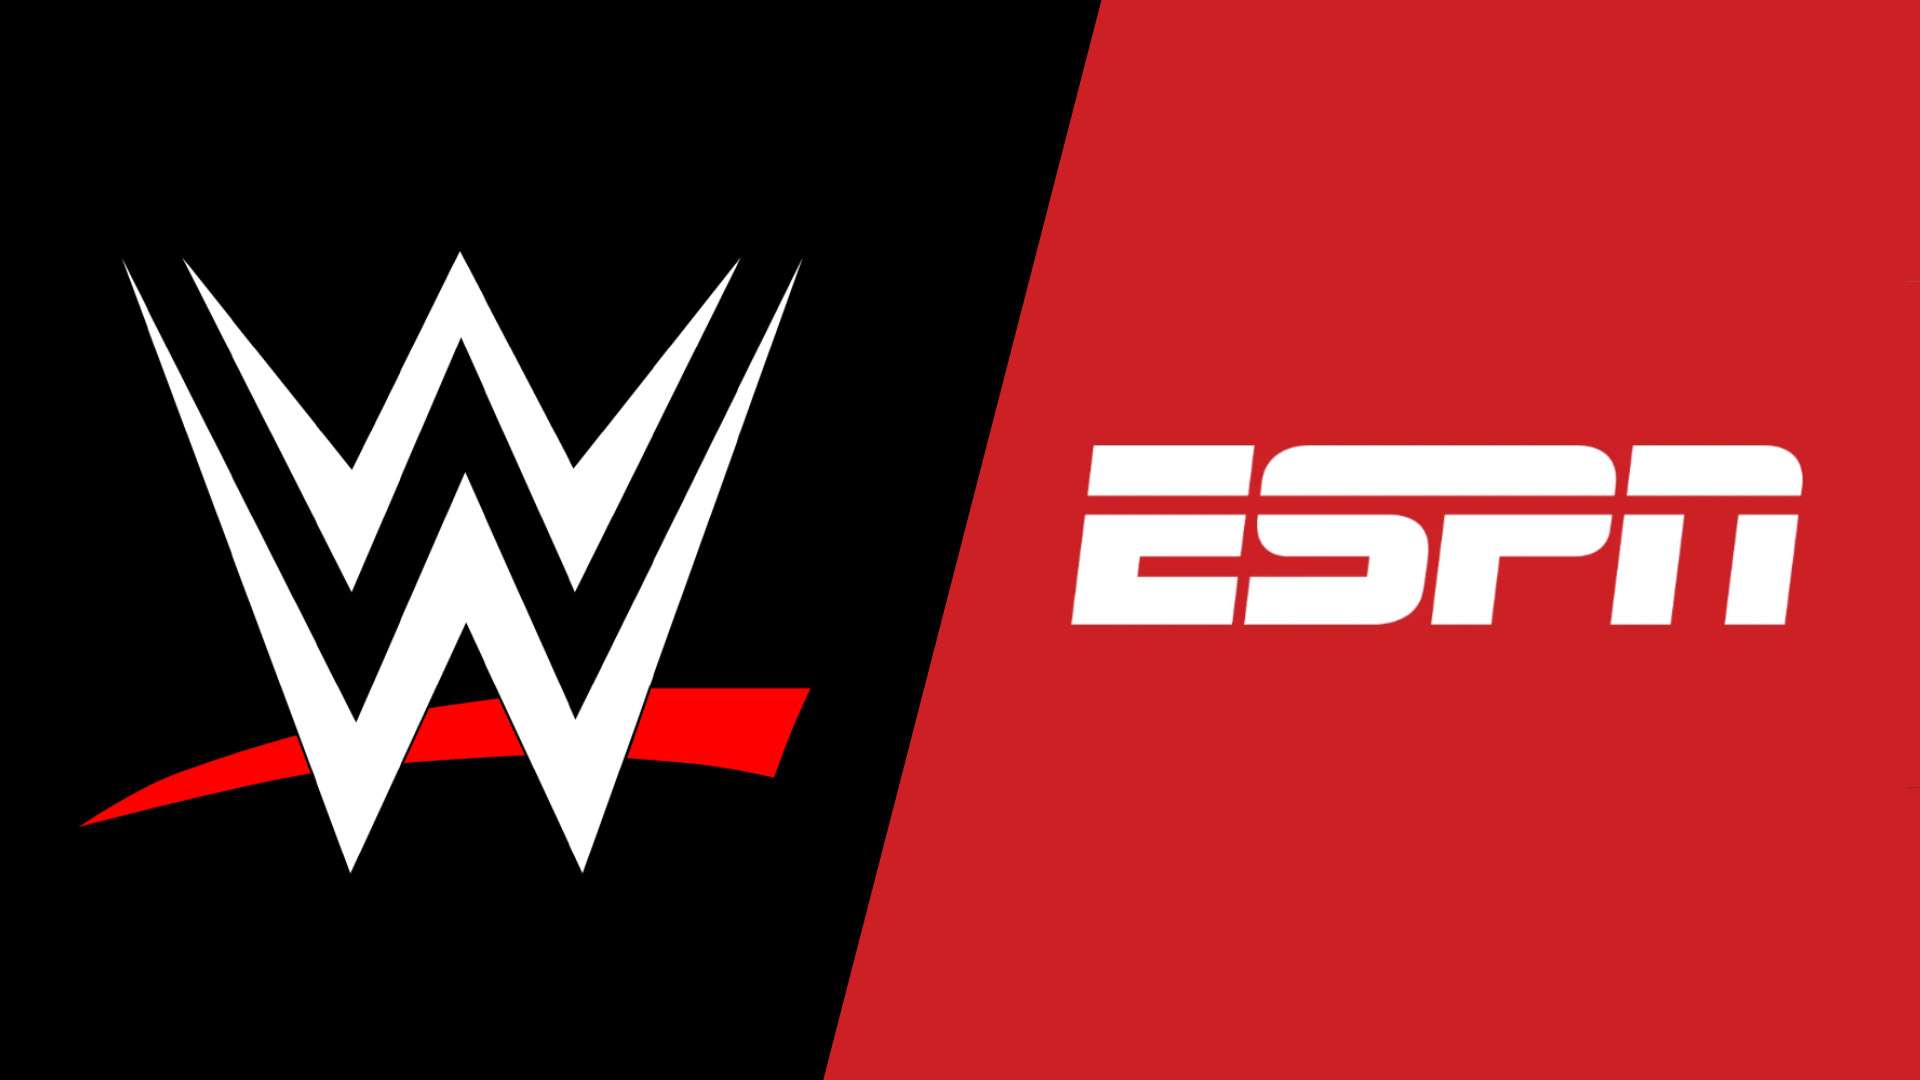 ESPN President of Content discusses their view on being potential distributor for WWE content if their rights are available